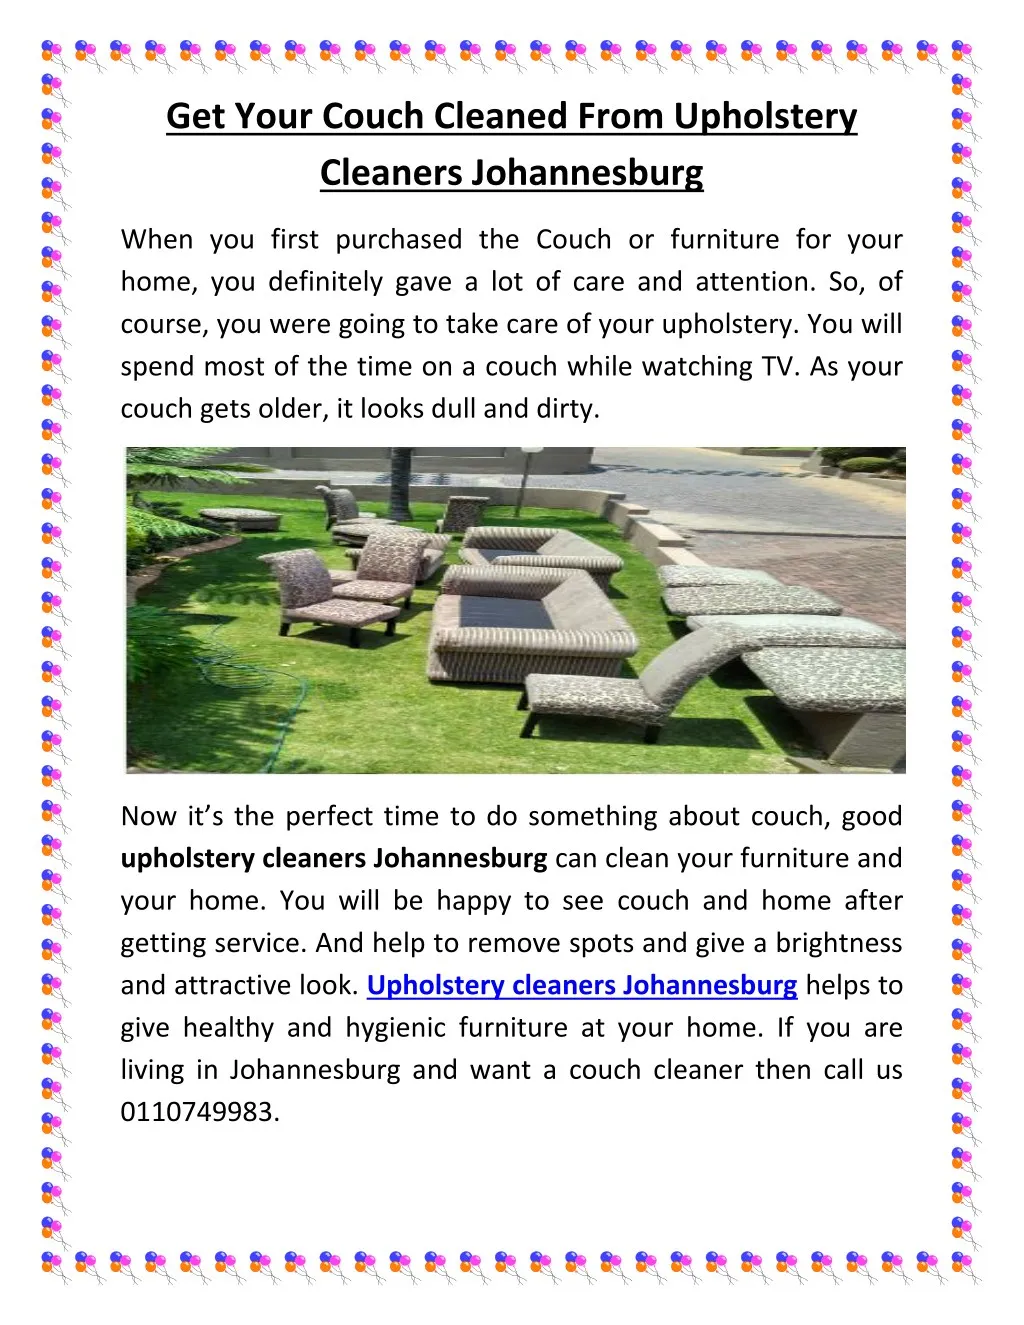 get your couch cleaned from upholstery cleaners